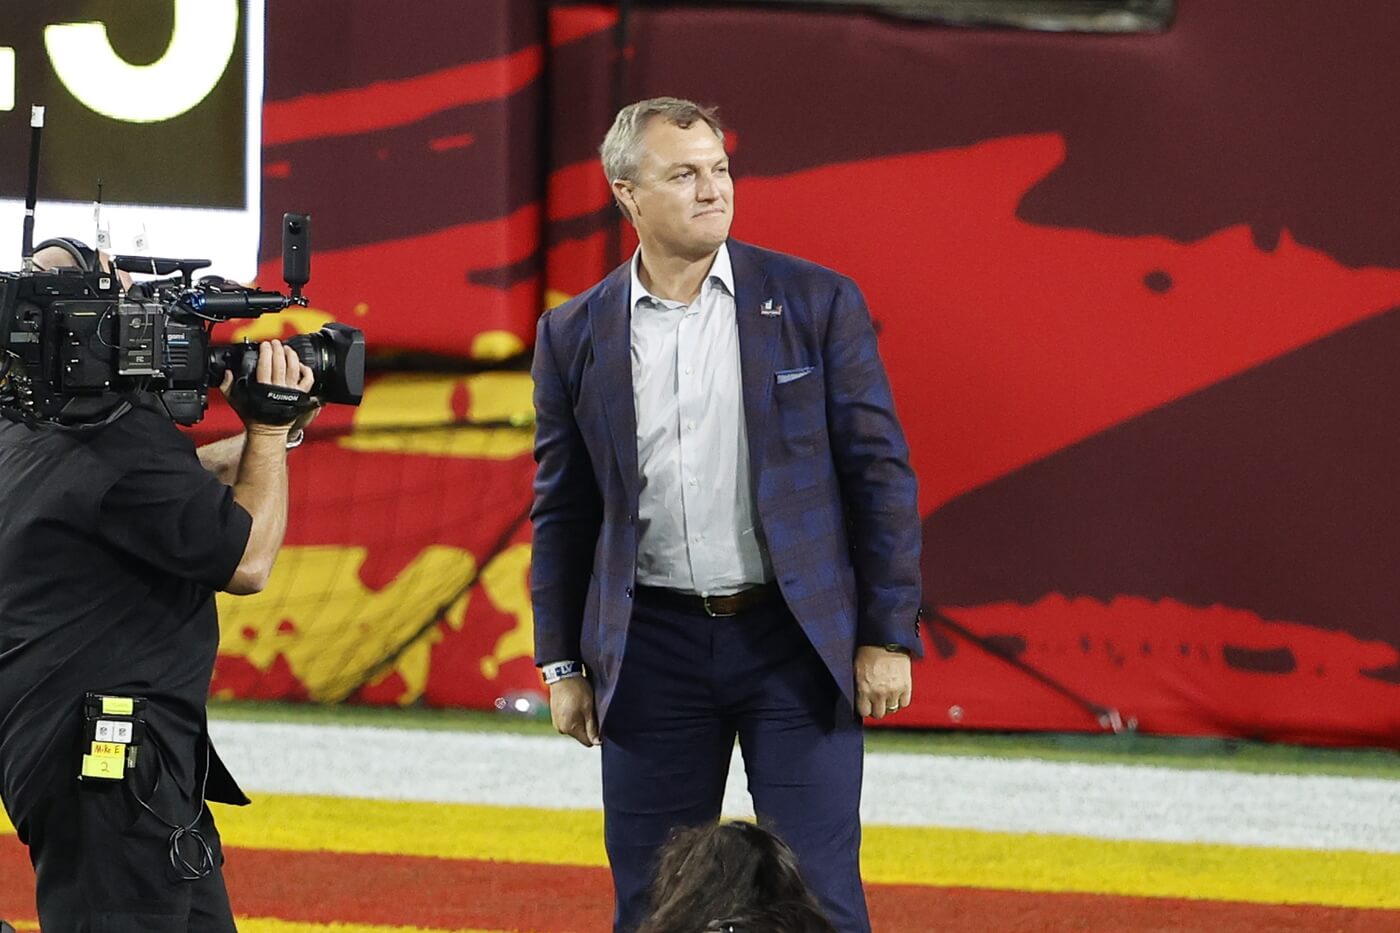 Feb 7, 2020; Tampa, FL, USA; NFL Hall of Fame inductee John Lynch is introduced during the first quarter of Super Bowl LV between the Kansas City Chiefs and the Tampa Bay Buccaneersat Raymond James Stadium. Mandatory Credit: Kim Klement-USA TODAY Sports